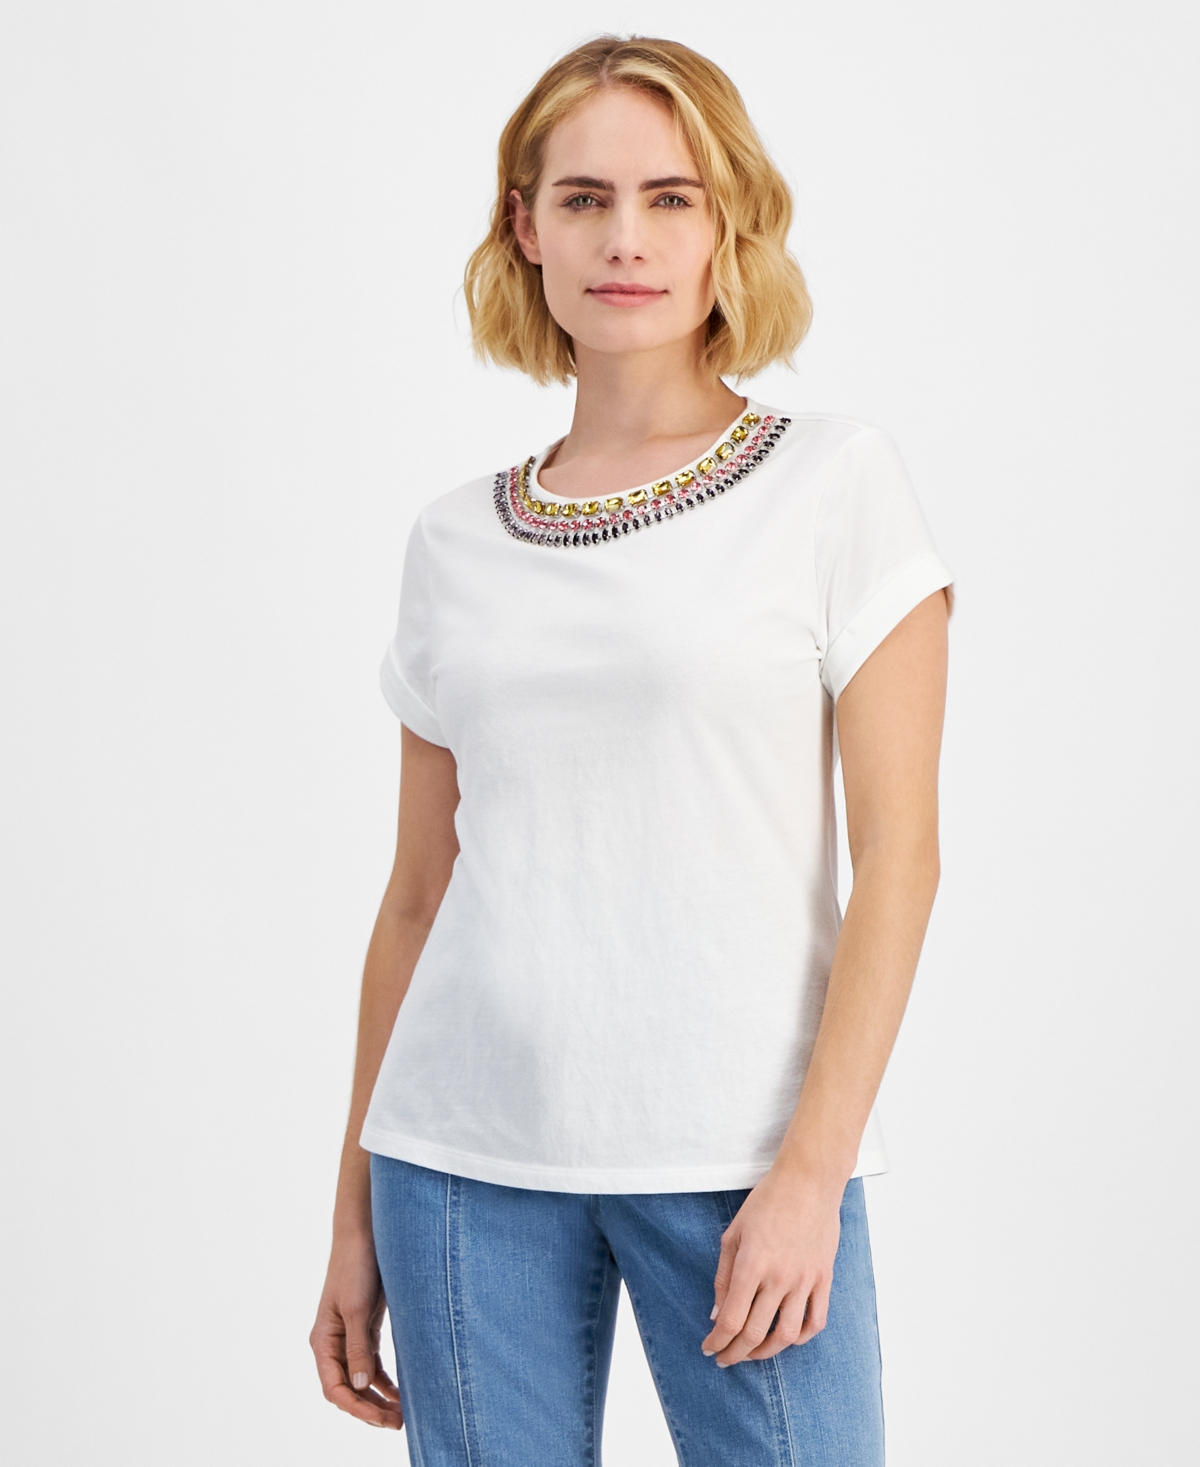 Petite Cotton Rhinestone-Embellished Top, Created for Macy's - Bright White